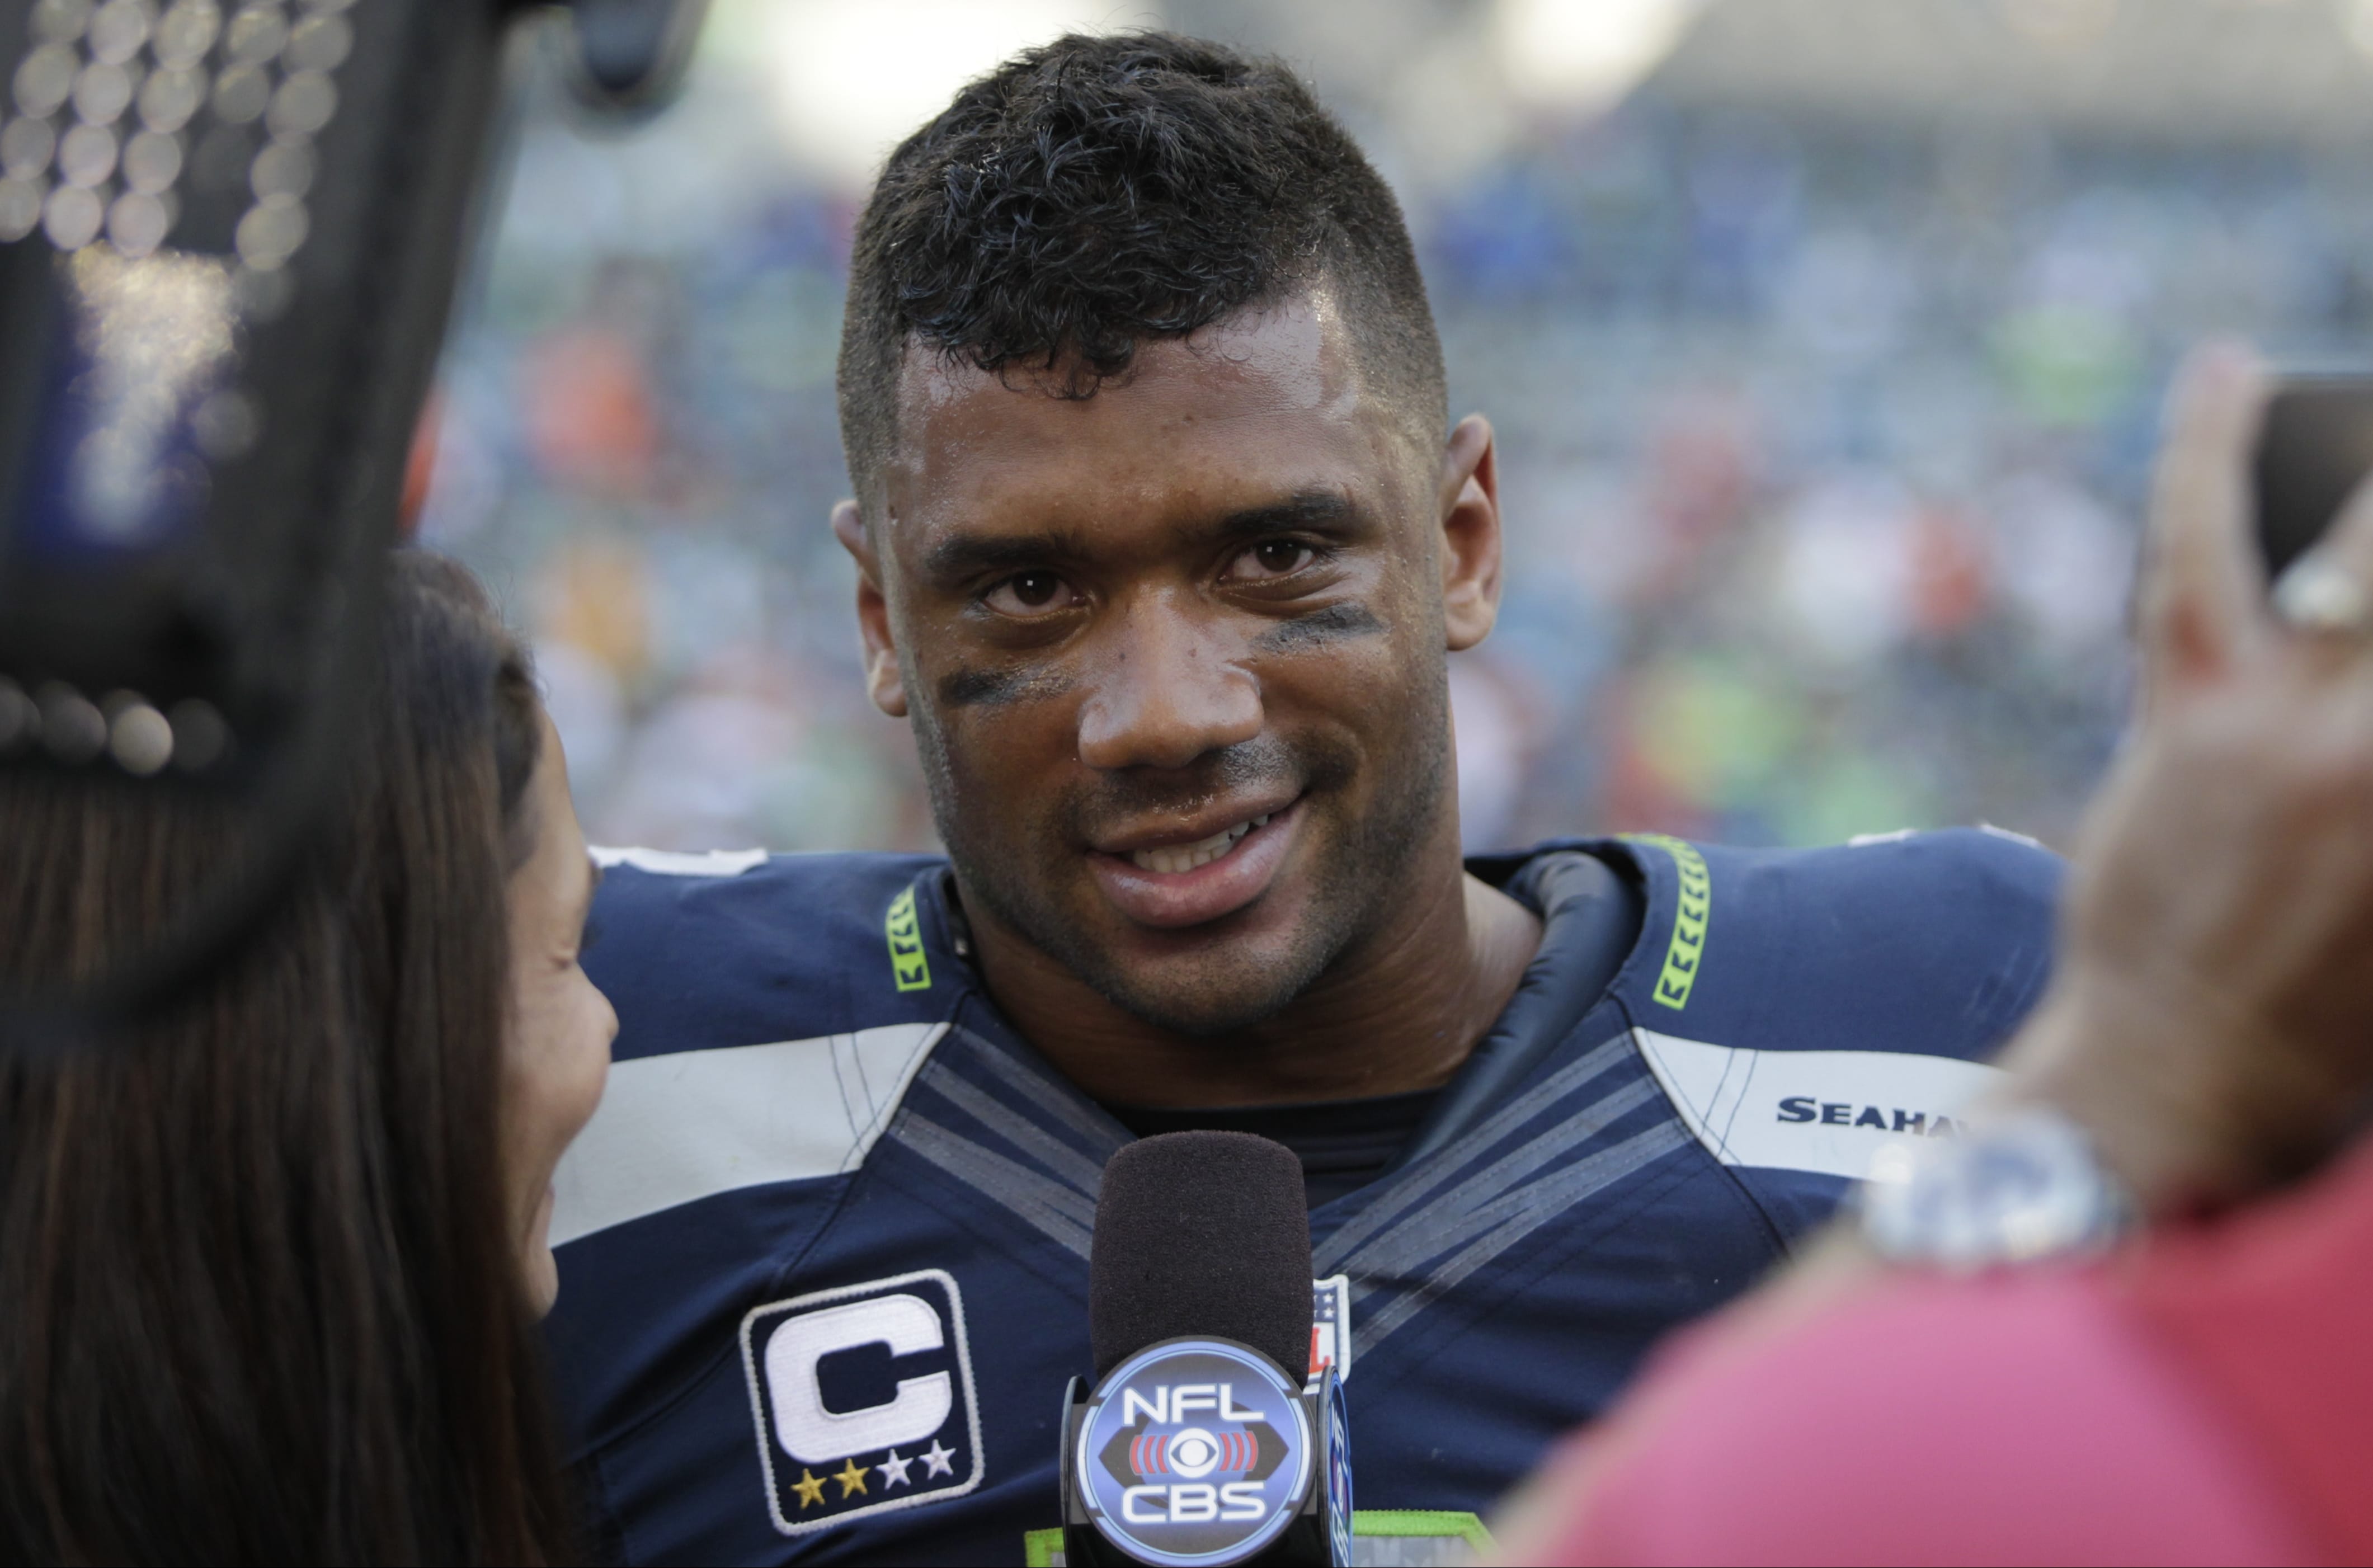 Seattle Seahawks quarterback Russell Wilson is interviewed on the field after defeating the Denver Broncos in overtime on Sunday, Sept. 21, 2014, in Seattle.